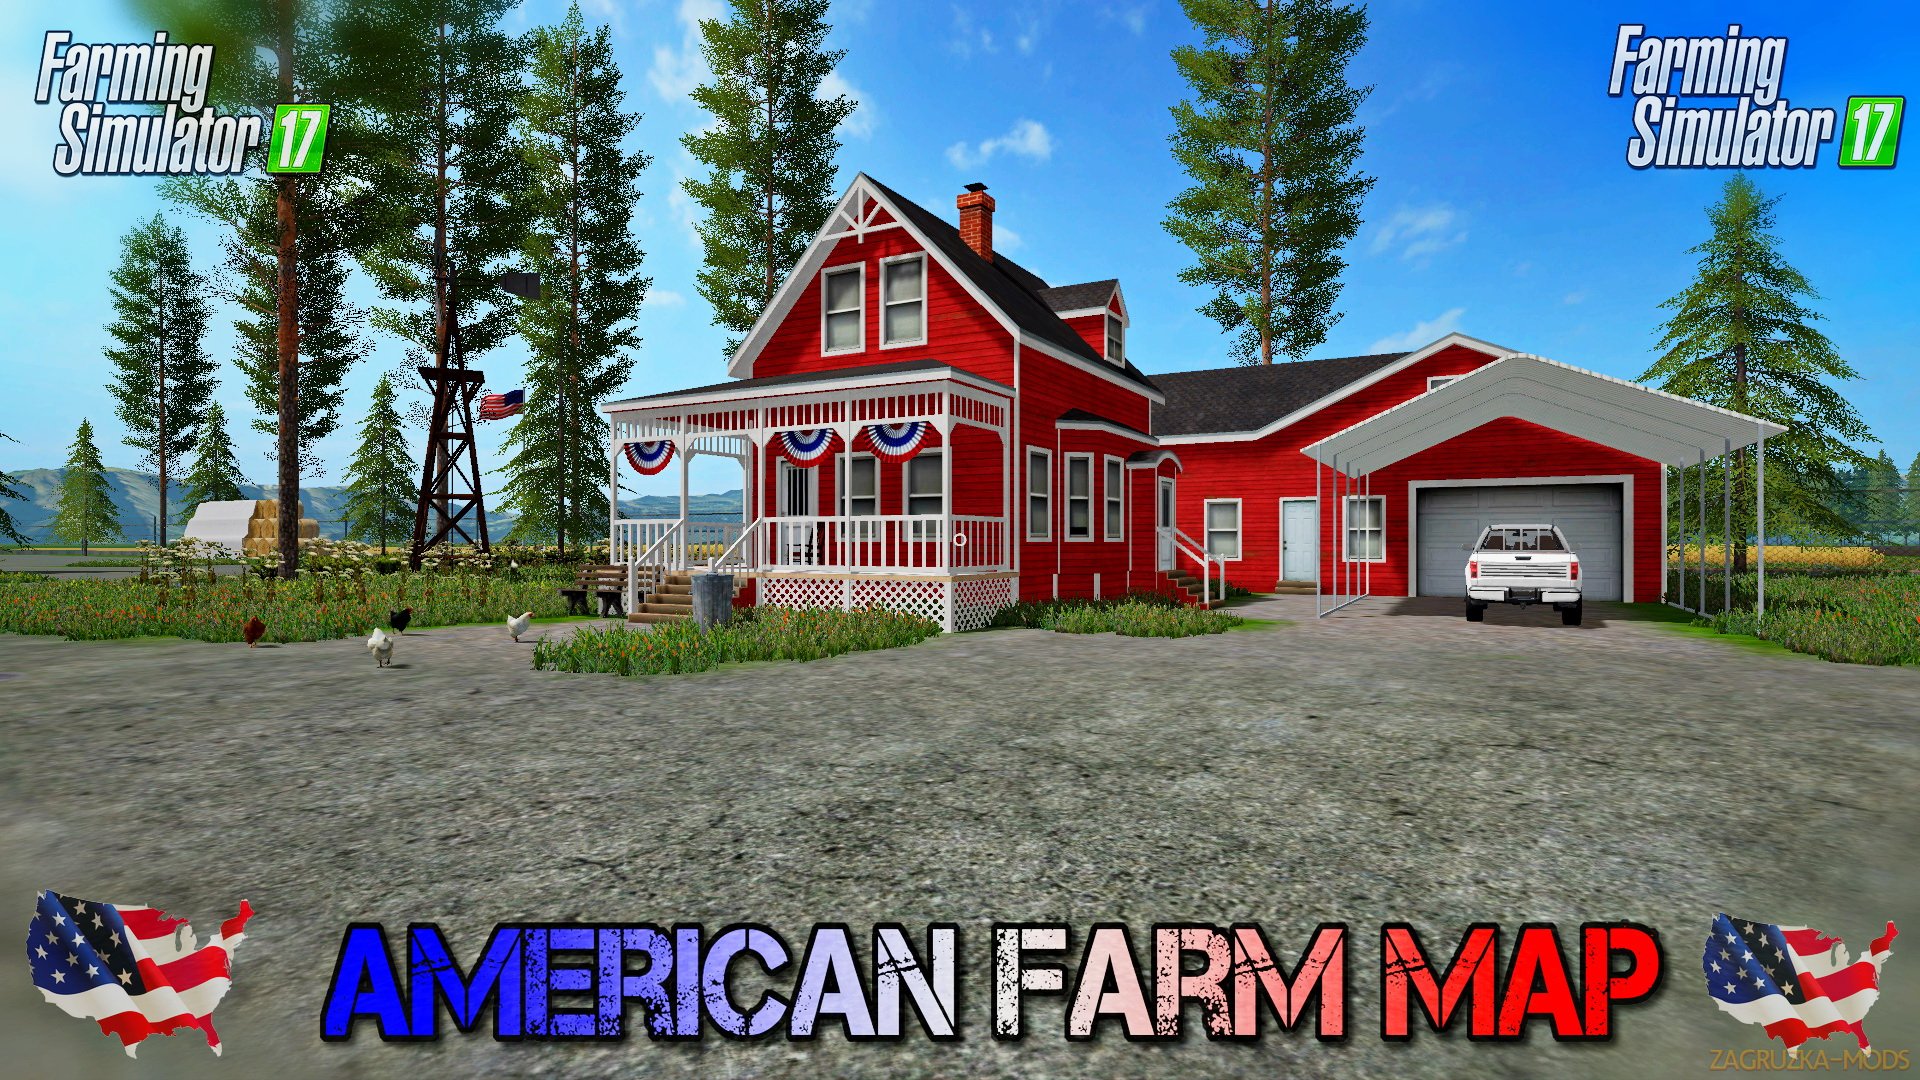 American Farm Map v3.0 by MikeModding for FS 17